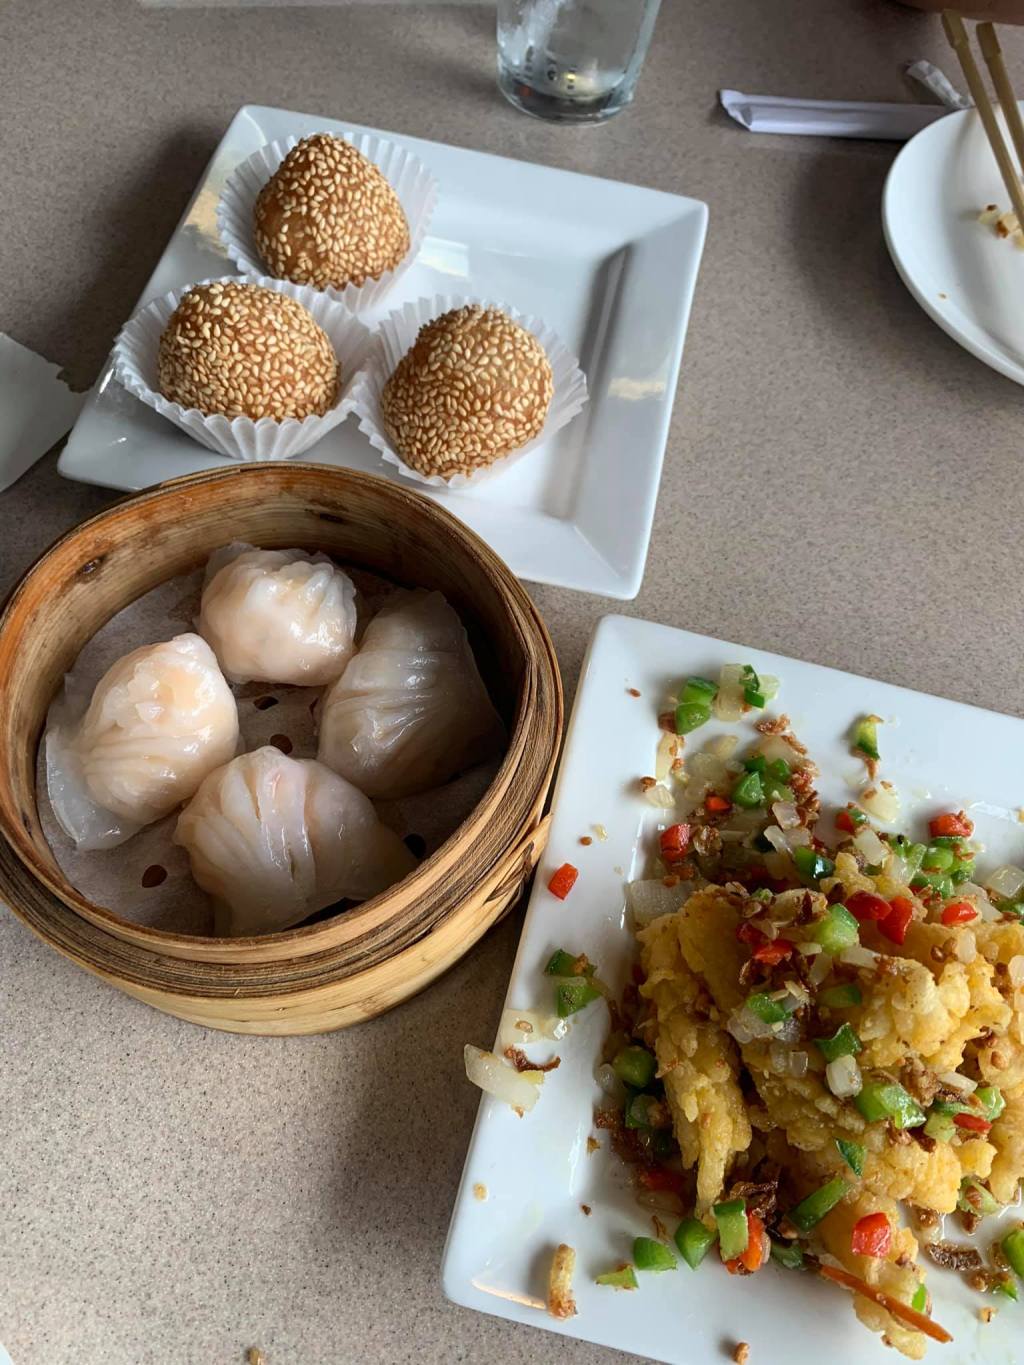 Chuan Lu Garden in Orlando offers dim sum worth paying for